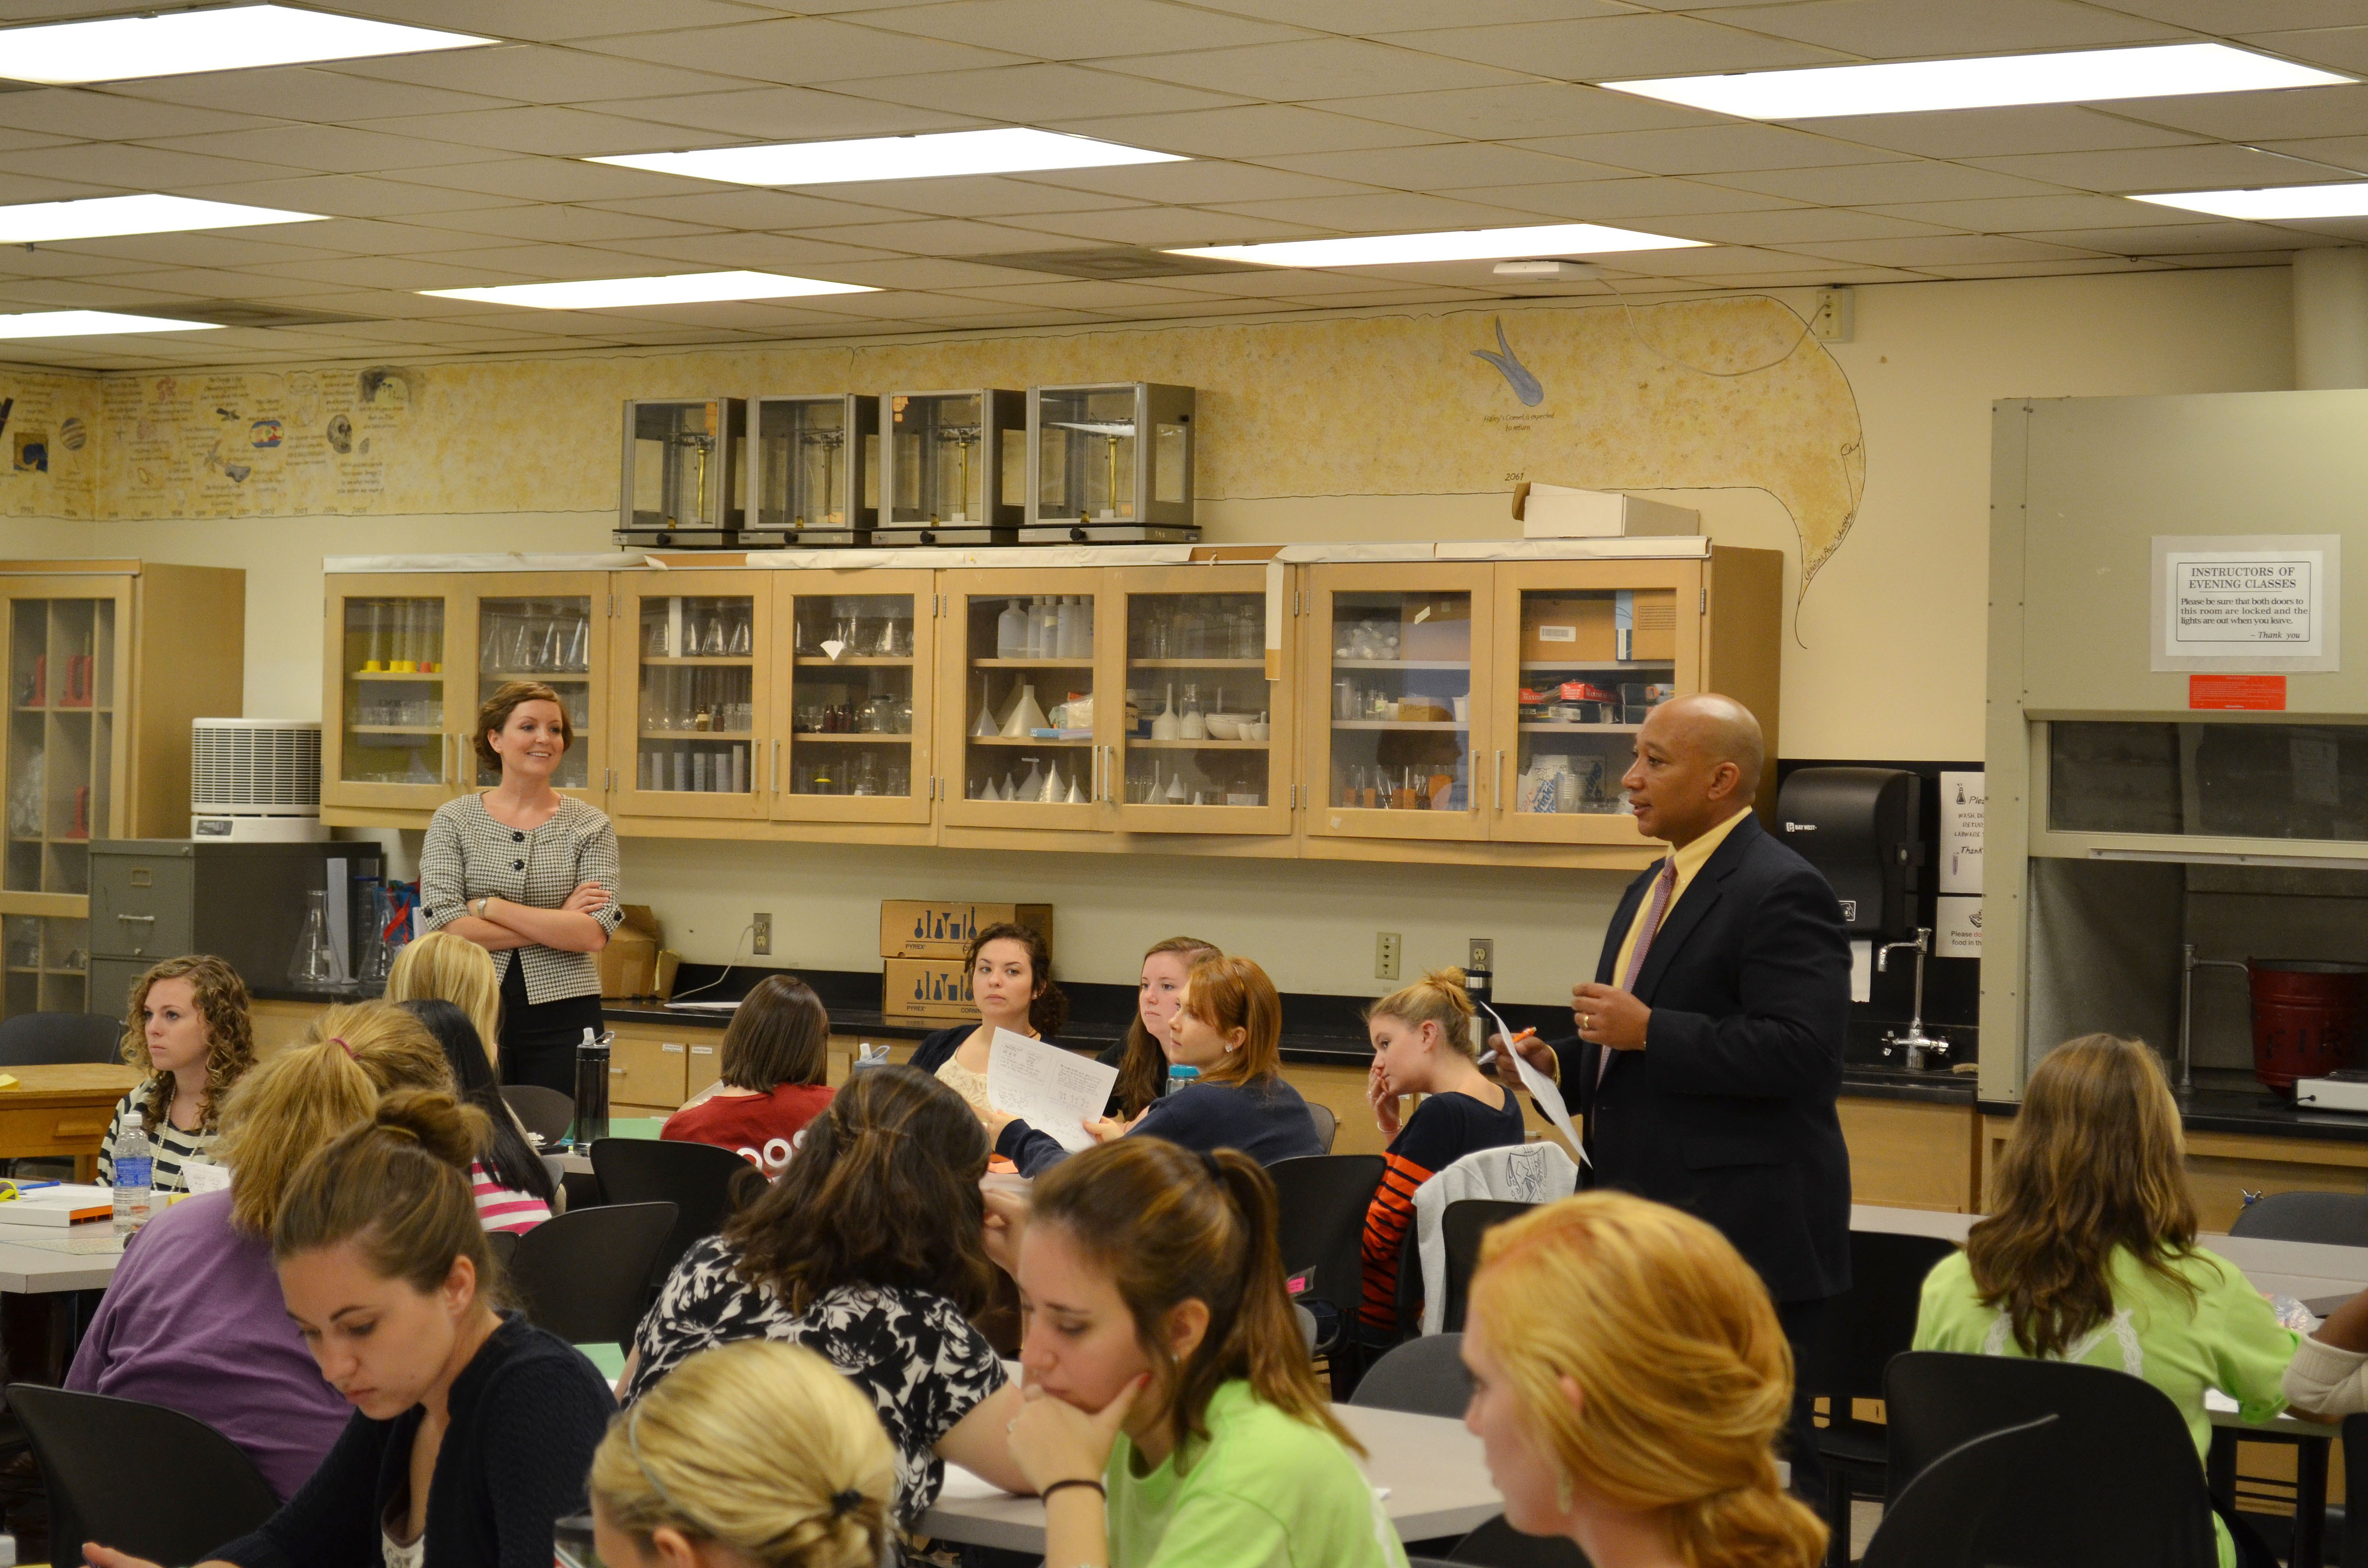  Robert Berry and Sarah Powell talk to students